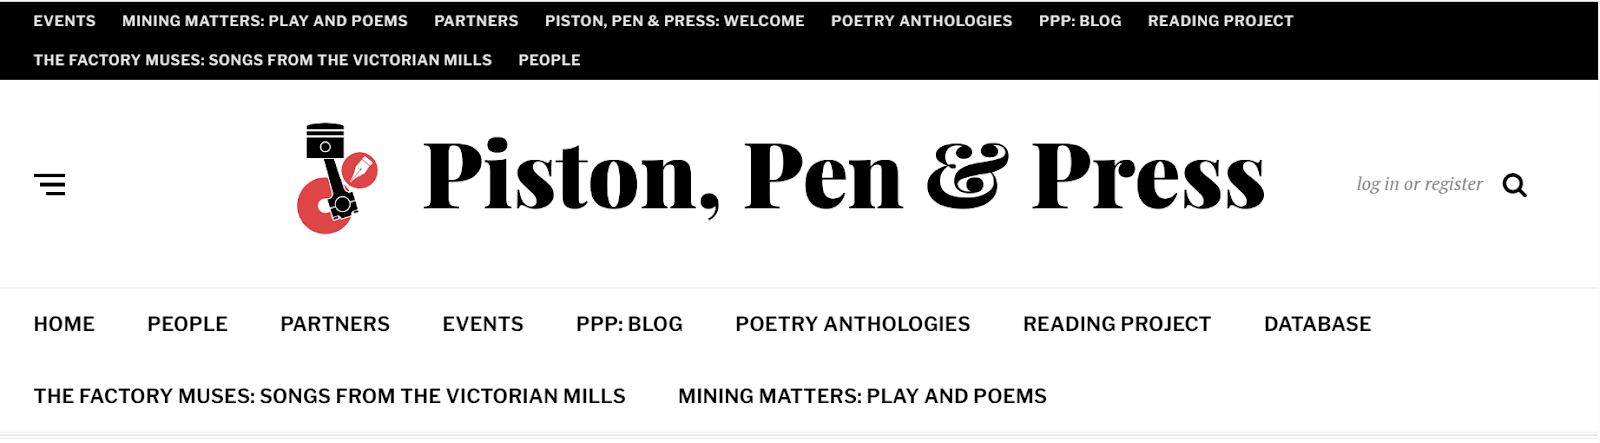 Fot. 1. Fragment strony https://www.pistonpenandpress.org/mining-matters-play-and-poems/